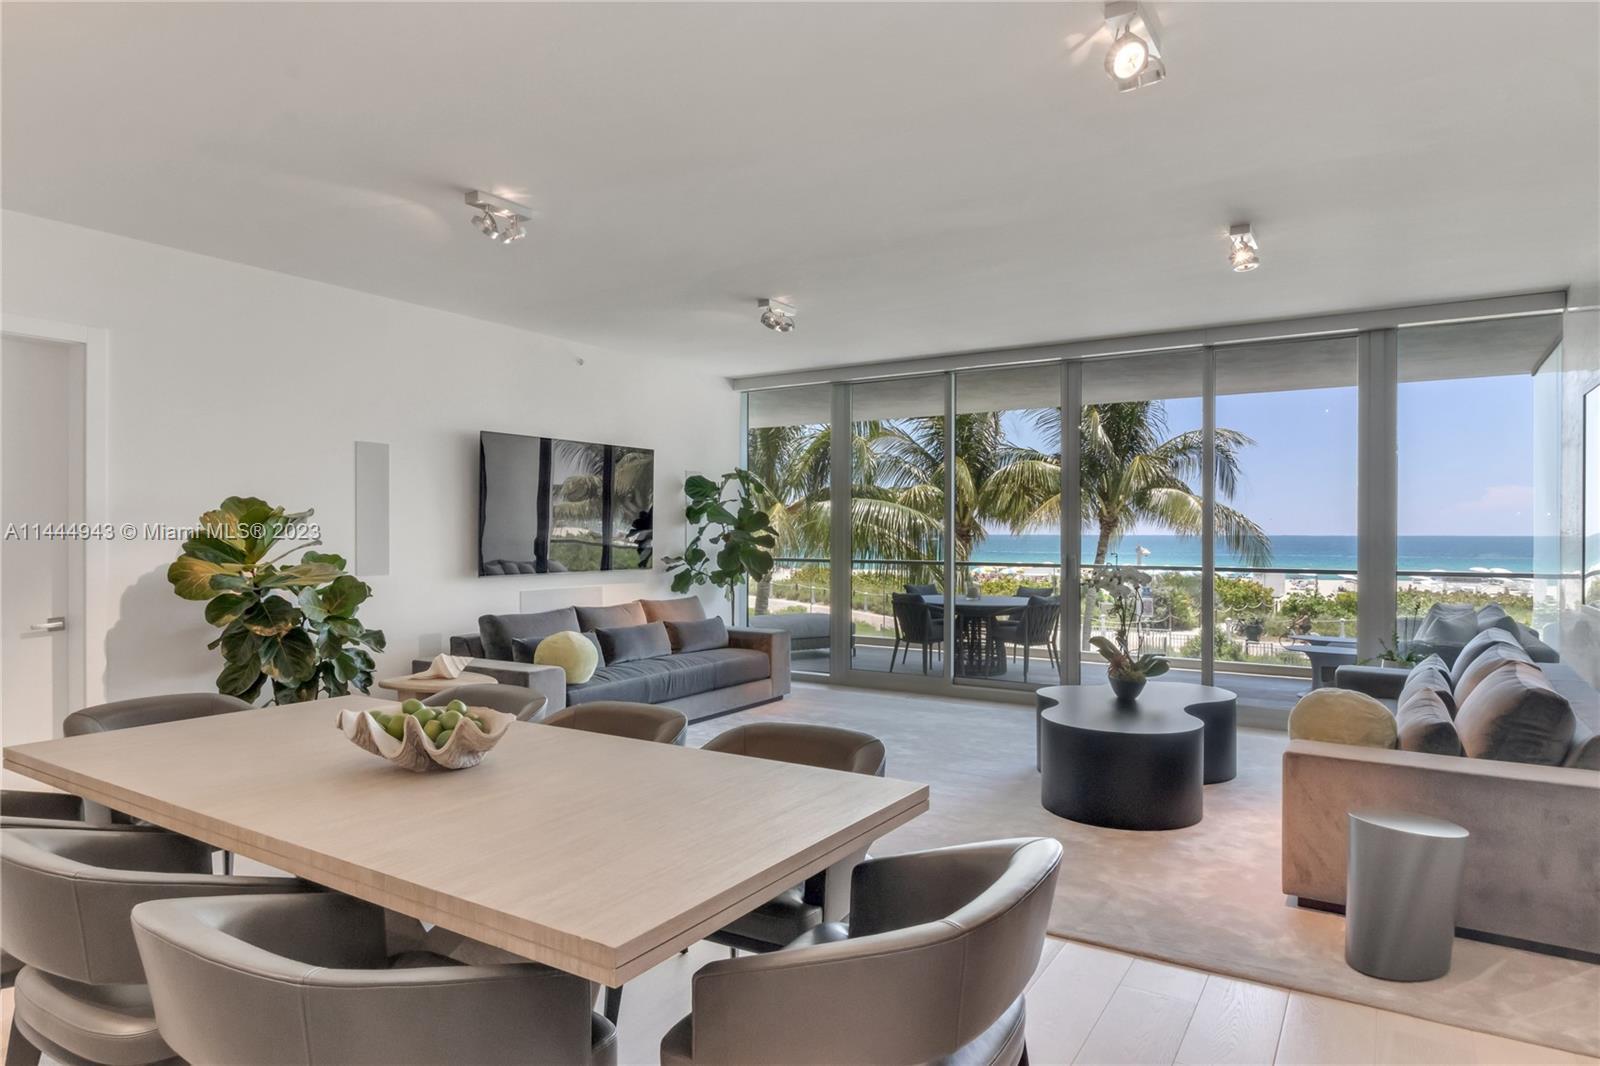 Beach House 201. This unique oceanfront home offers the perfect balance for those seeking the floor 